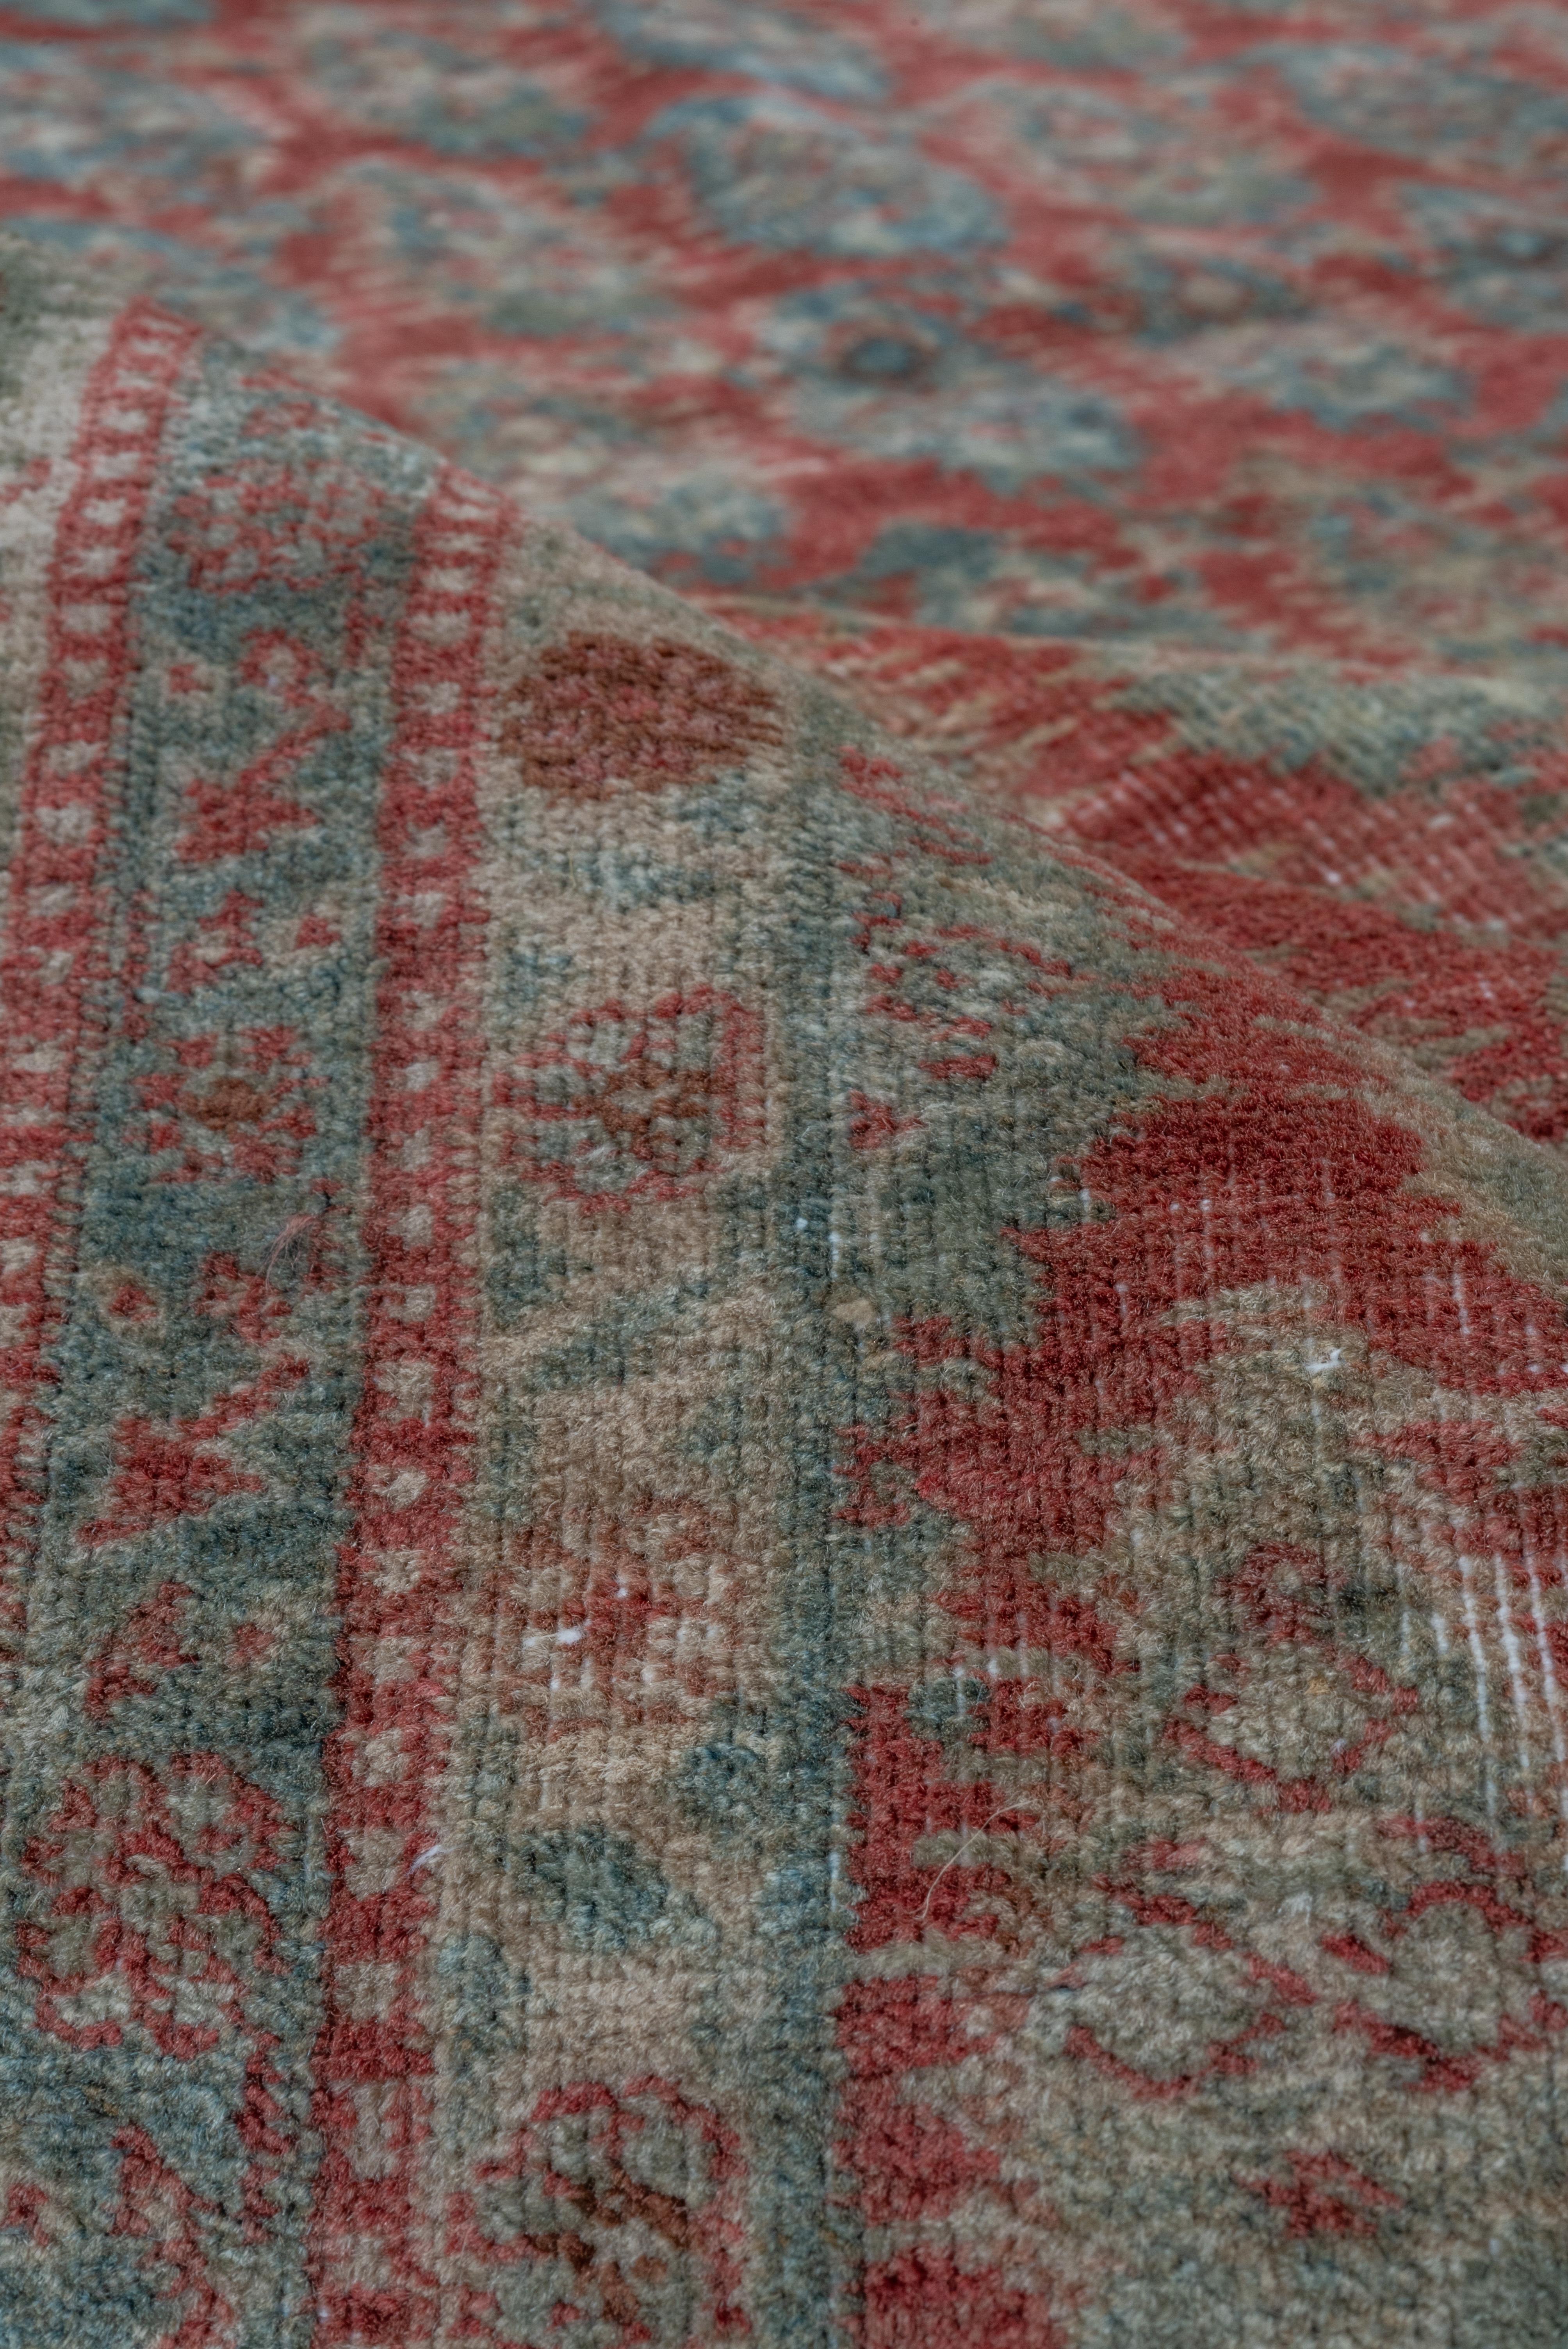 Offset rows of fringed cones closely cover the abrashed rusty-red field of this East Anatolian town carpet in the general Saraband manner. The blue and ivory border features round, serrated rosette flowers and thin vinery. Good condition with